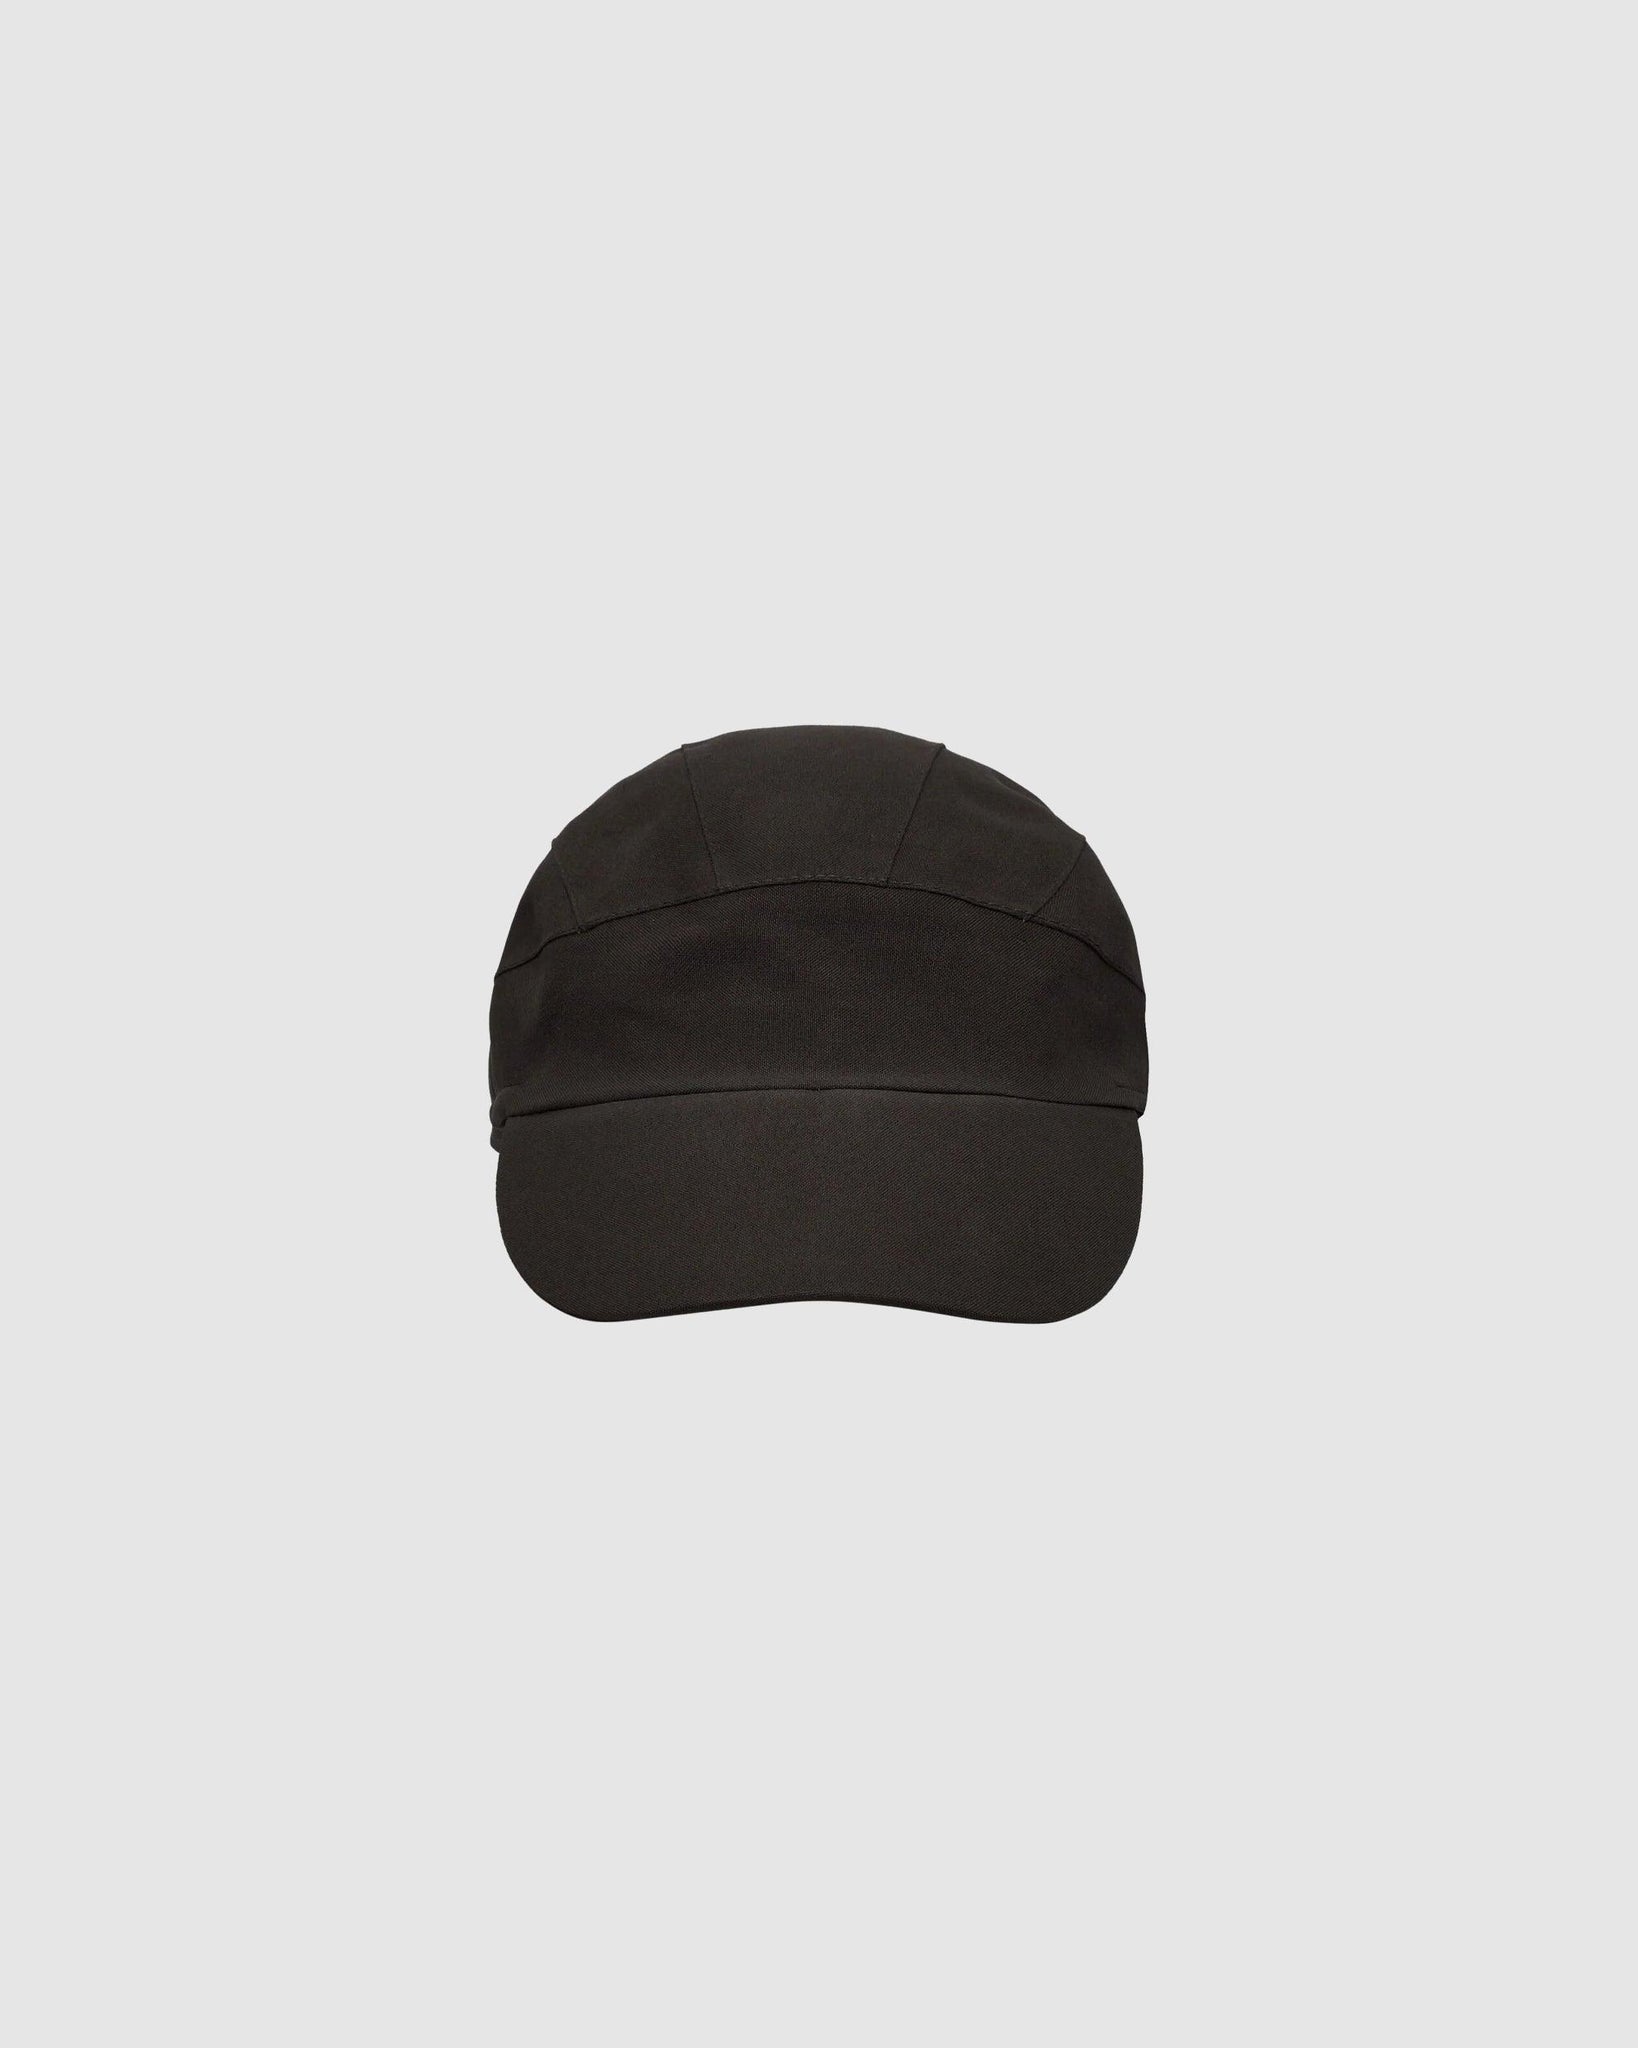 Rogaining Cap Dark Soil Grey - {{ collection.title }} - Chinatown Country Club 